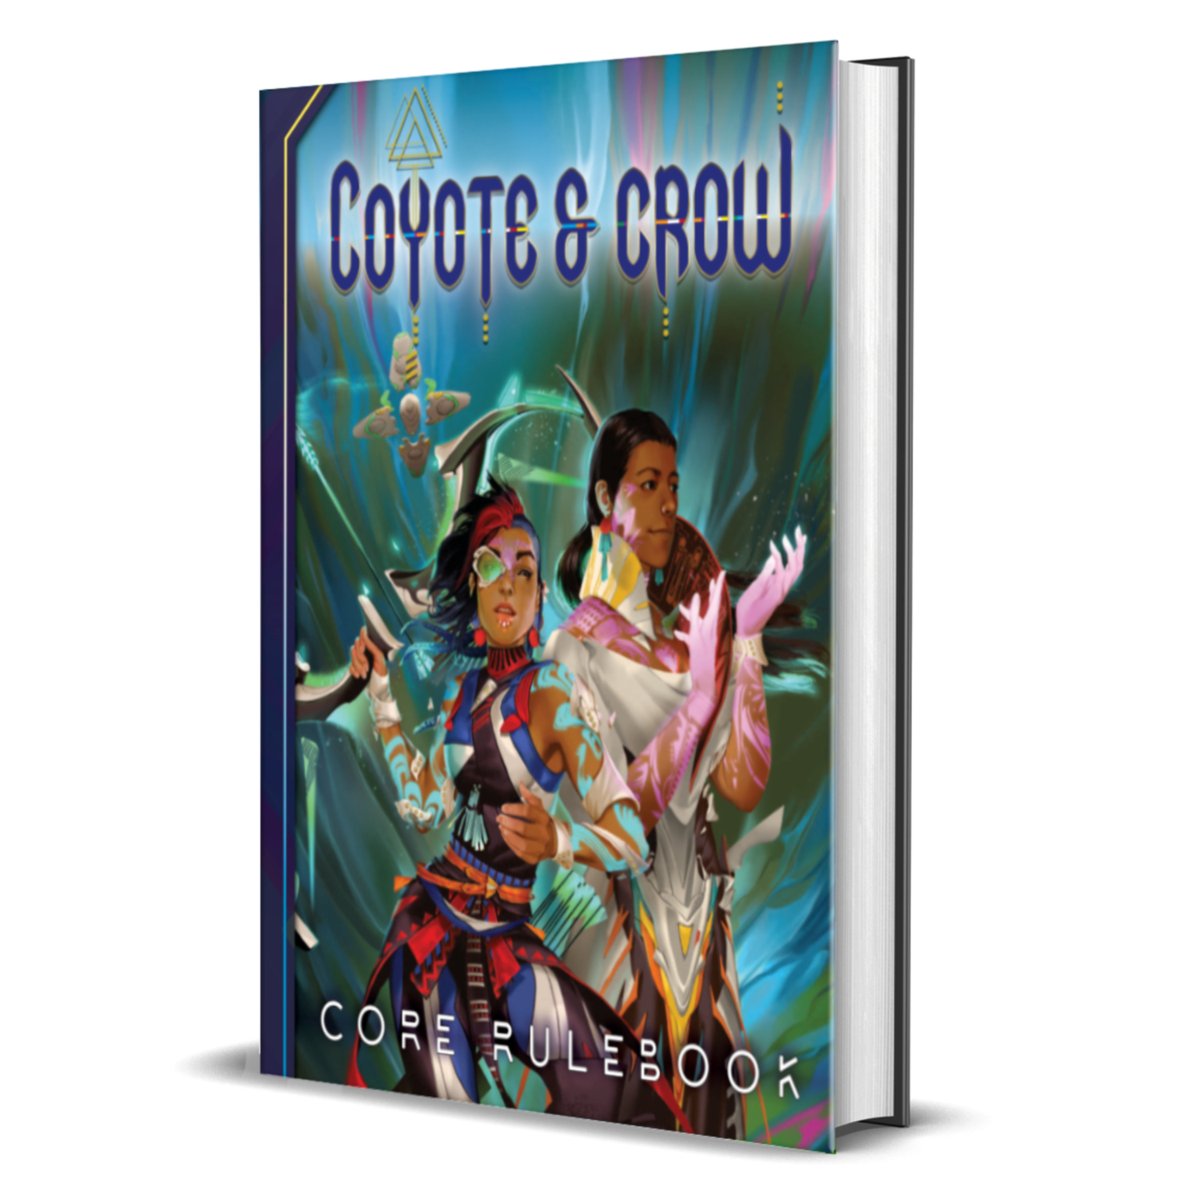 Reminder! If you would like a copy of the Coyote & Crow RPG donated to a specific library, community center or school, have them fill out the following form (they need to do it themselves): forms.gle/fXm9UP6CNNjEJW… #NativeTwitter #Indigenous